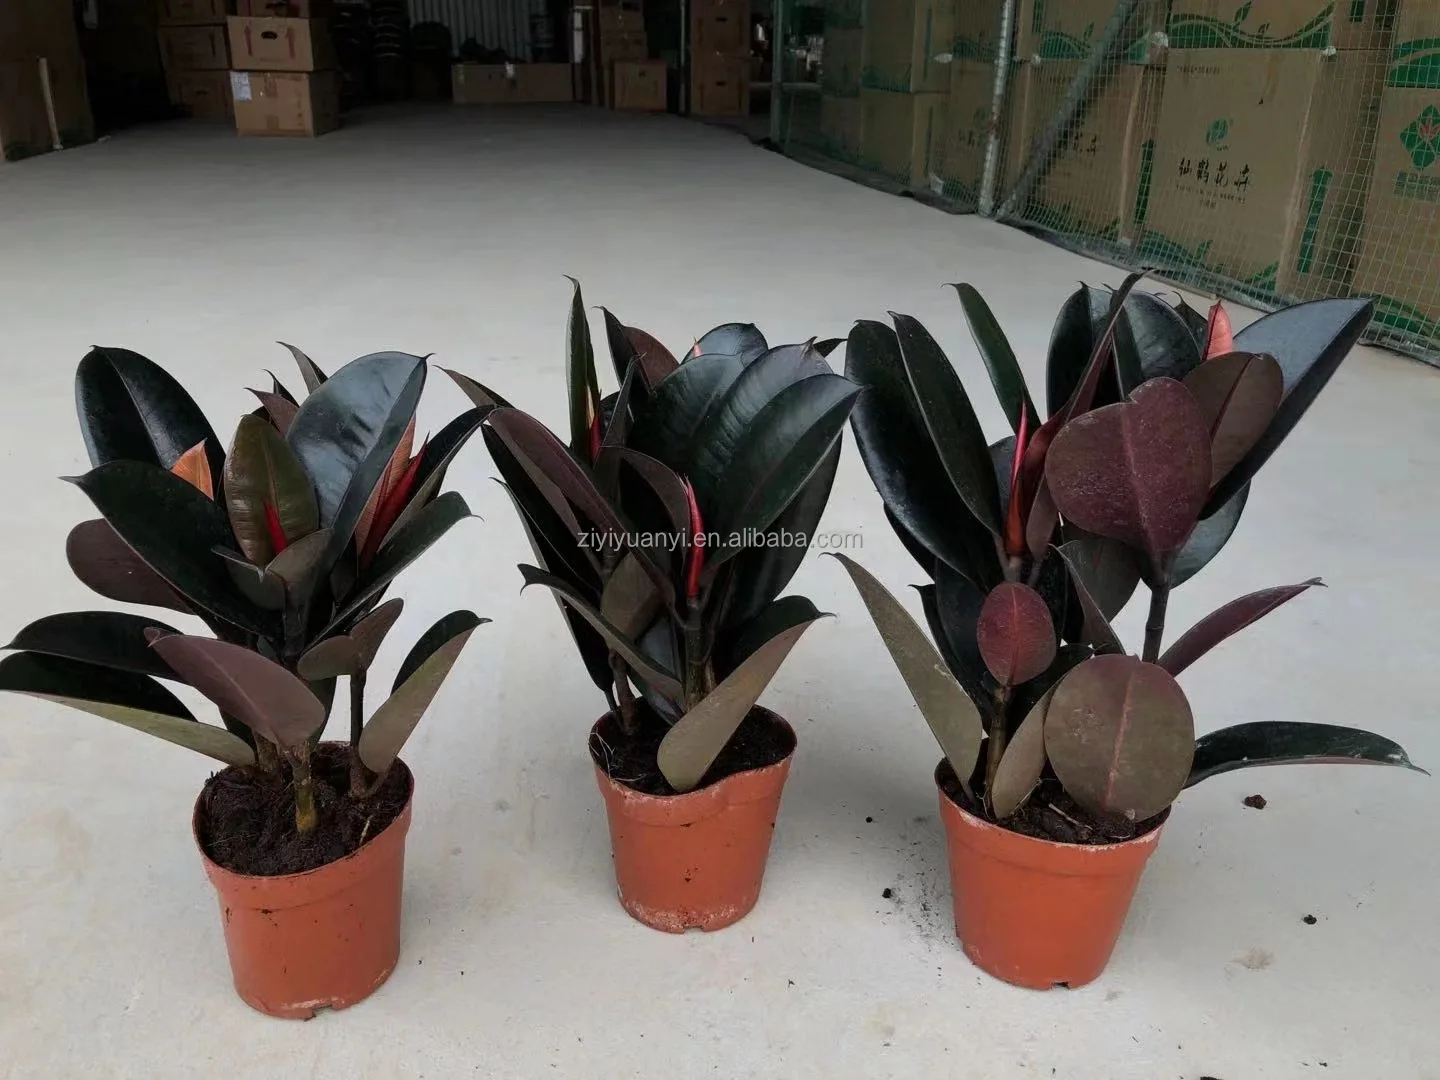 
Wholesale beautiful live plant Rubber ficus Tree black prince Tineke ruby Indoor natural plants 3 in 1 